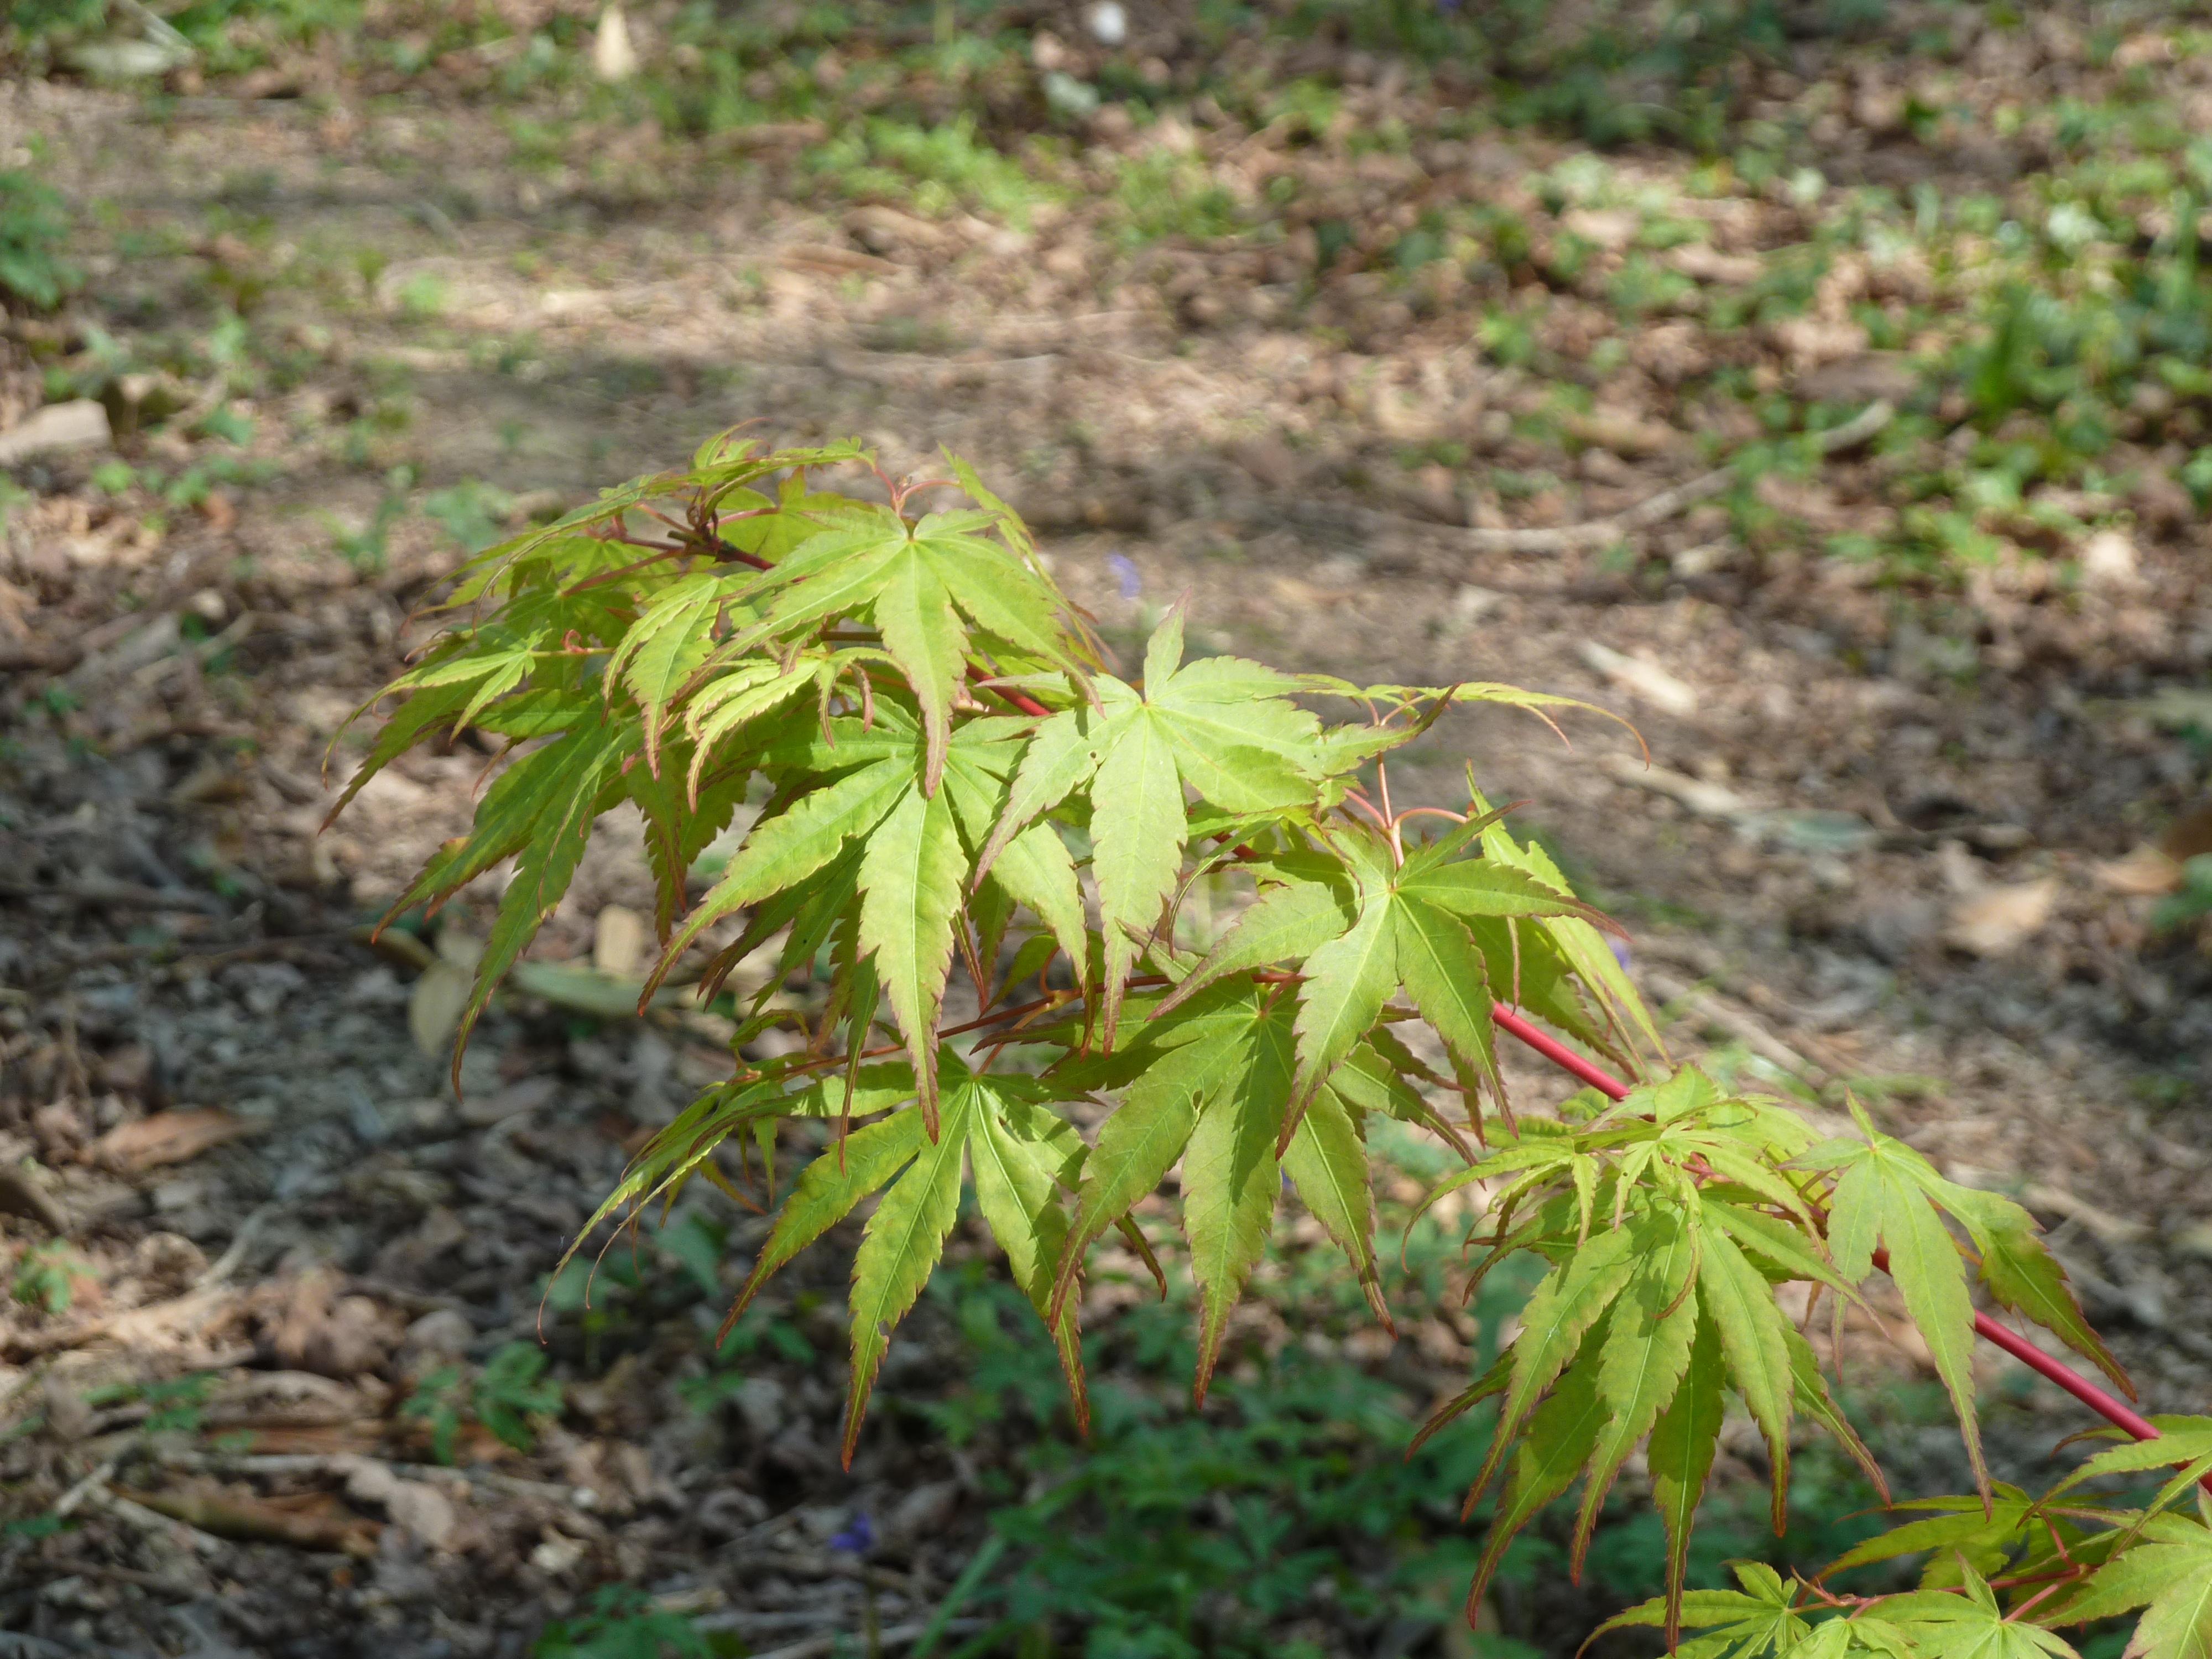 red-green leaves with red stems